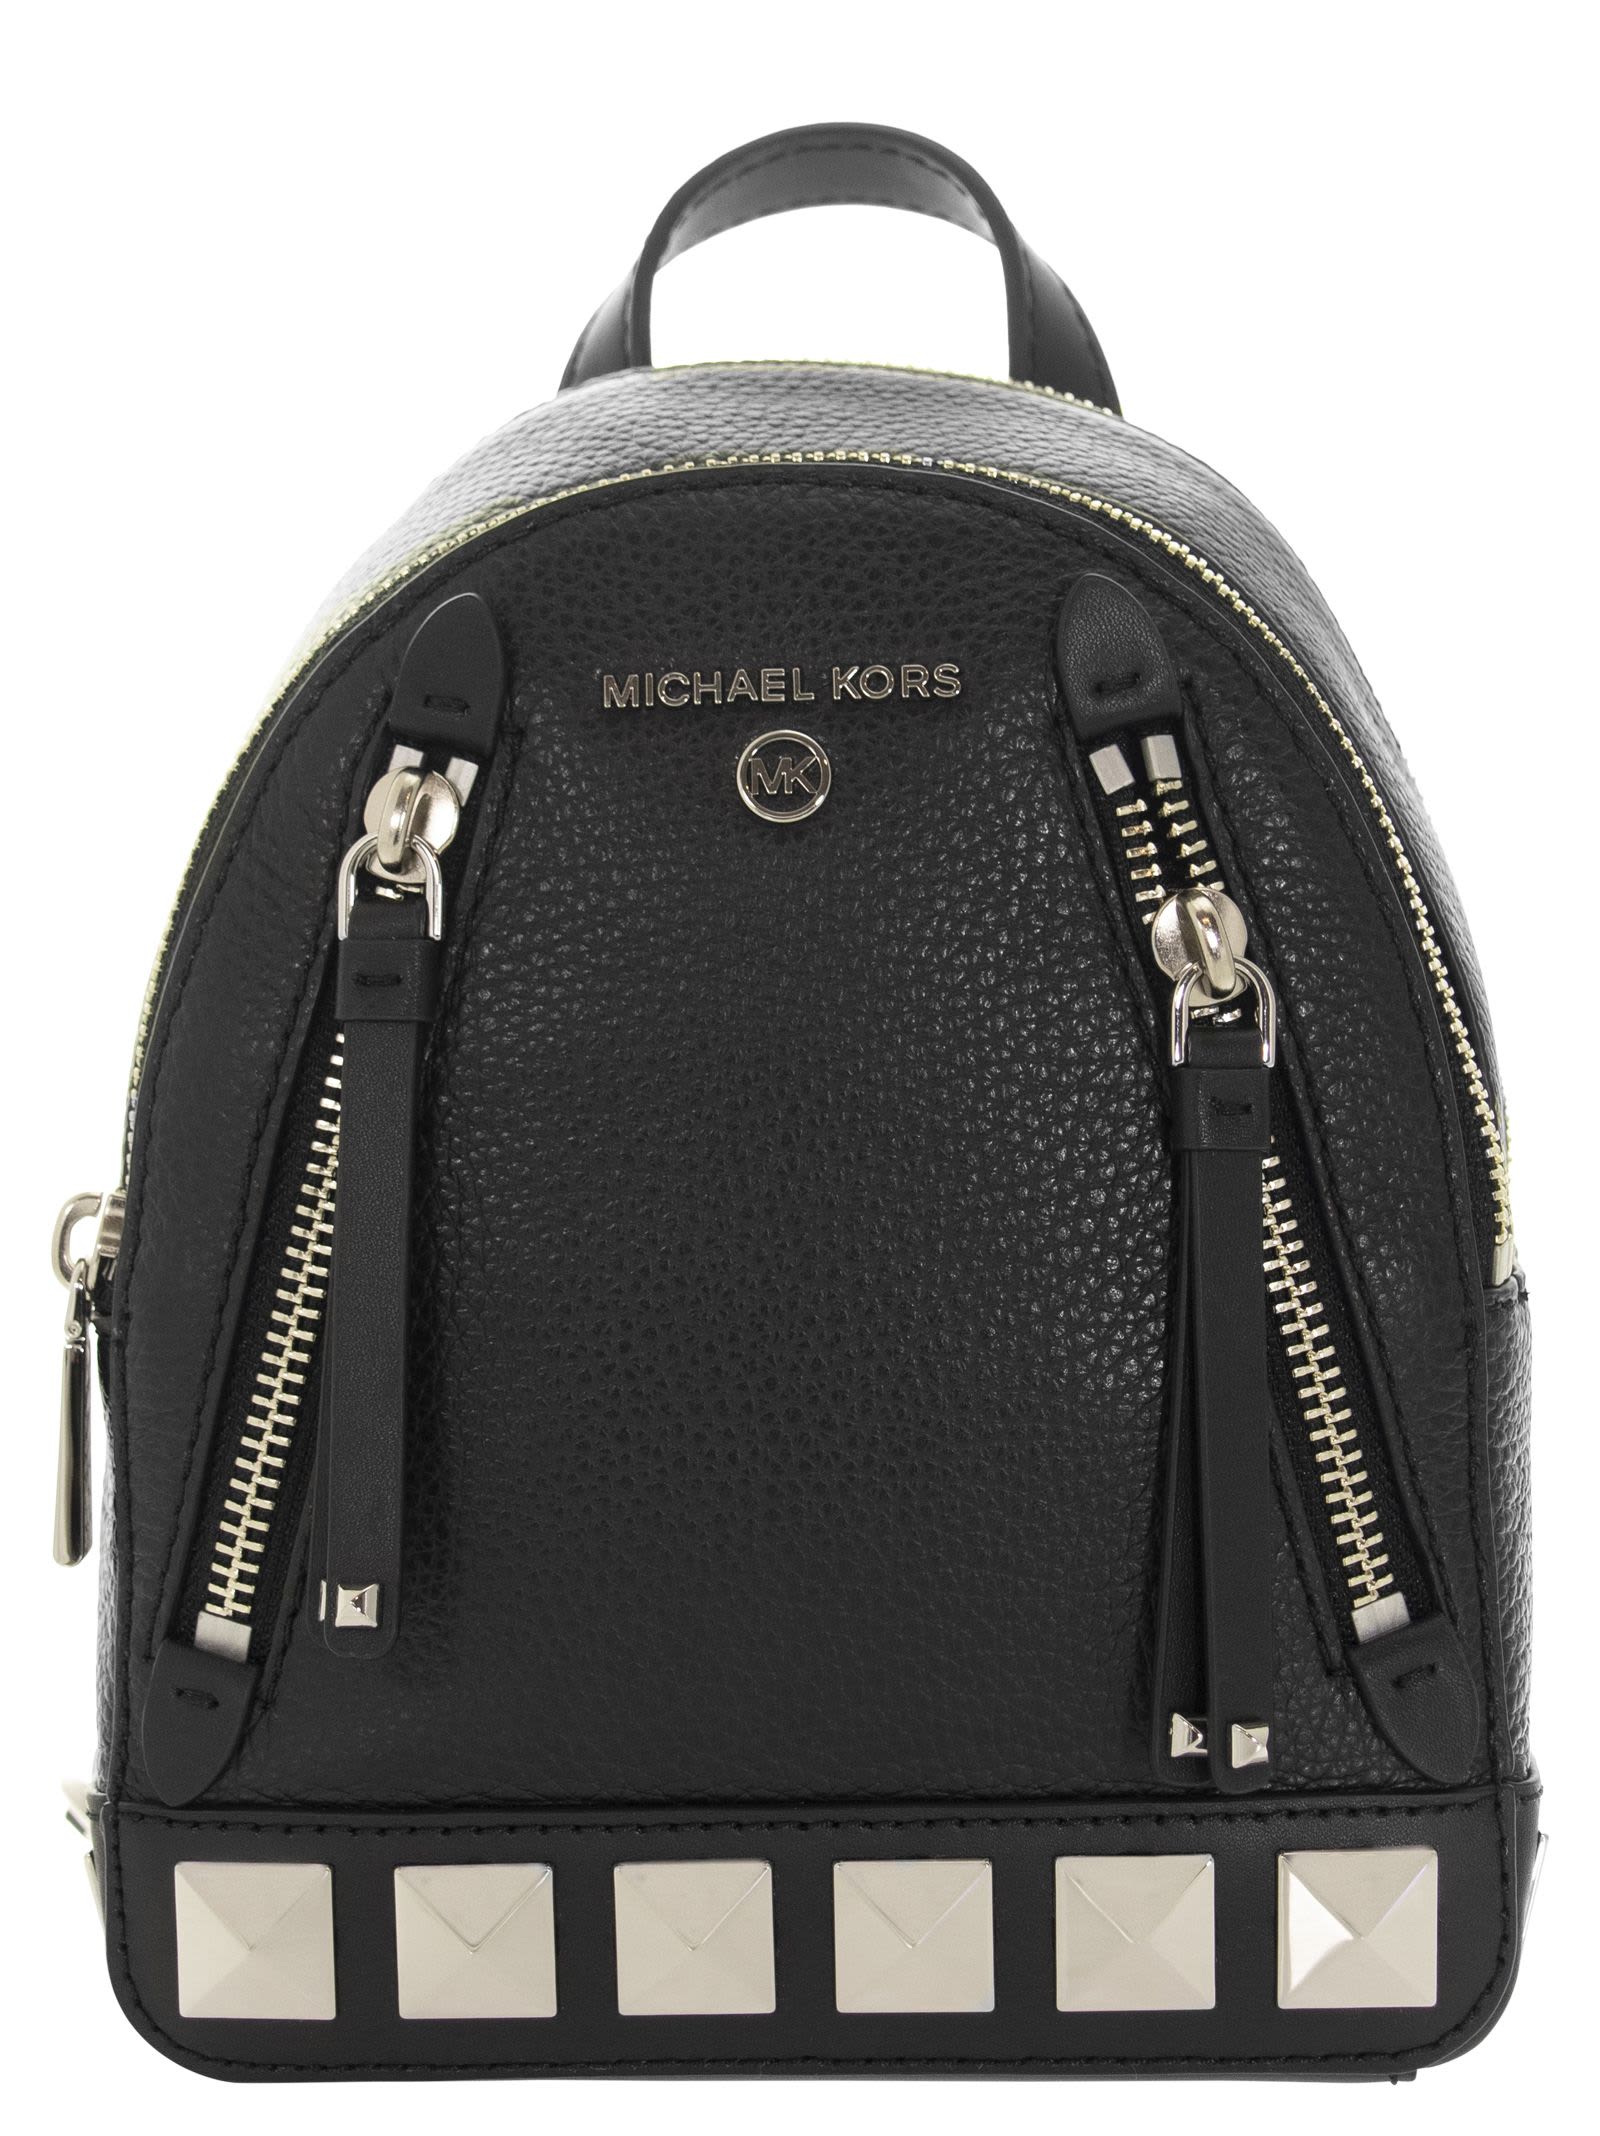 Michael Kors Grained Leather Backpack